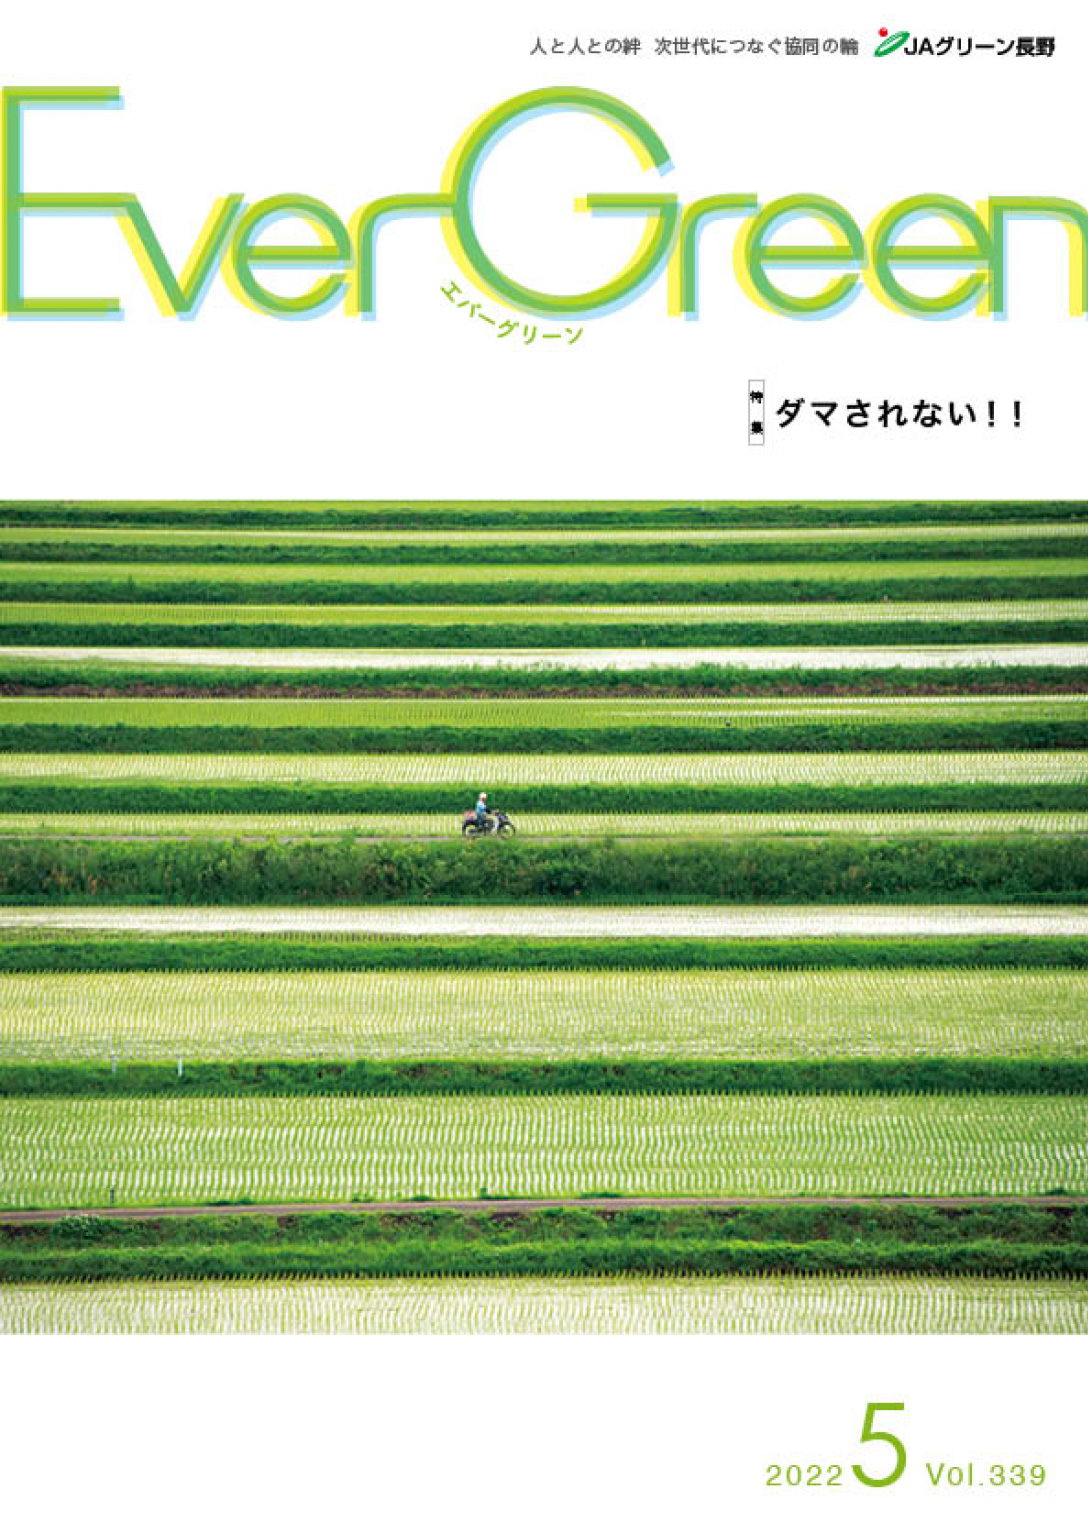 Ever Green5月号発行のご案内